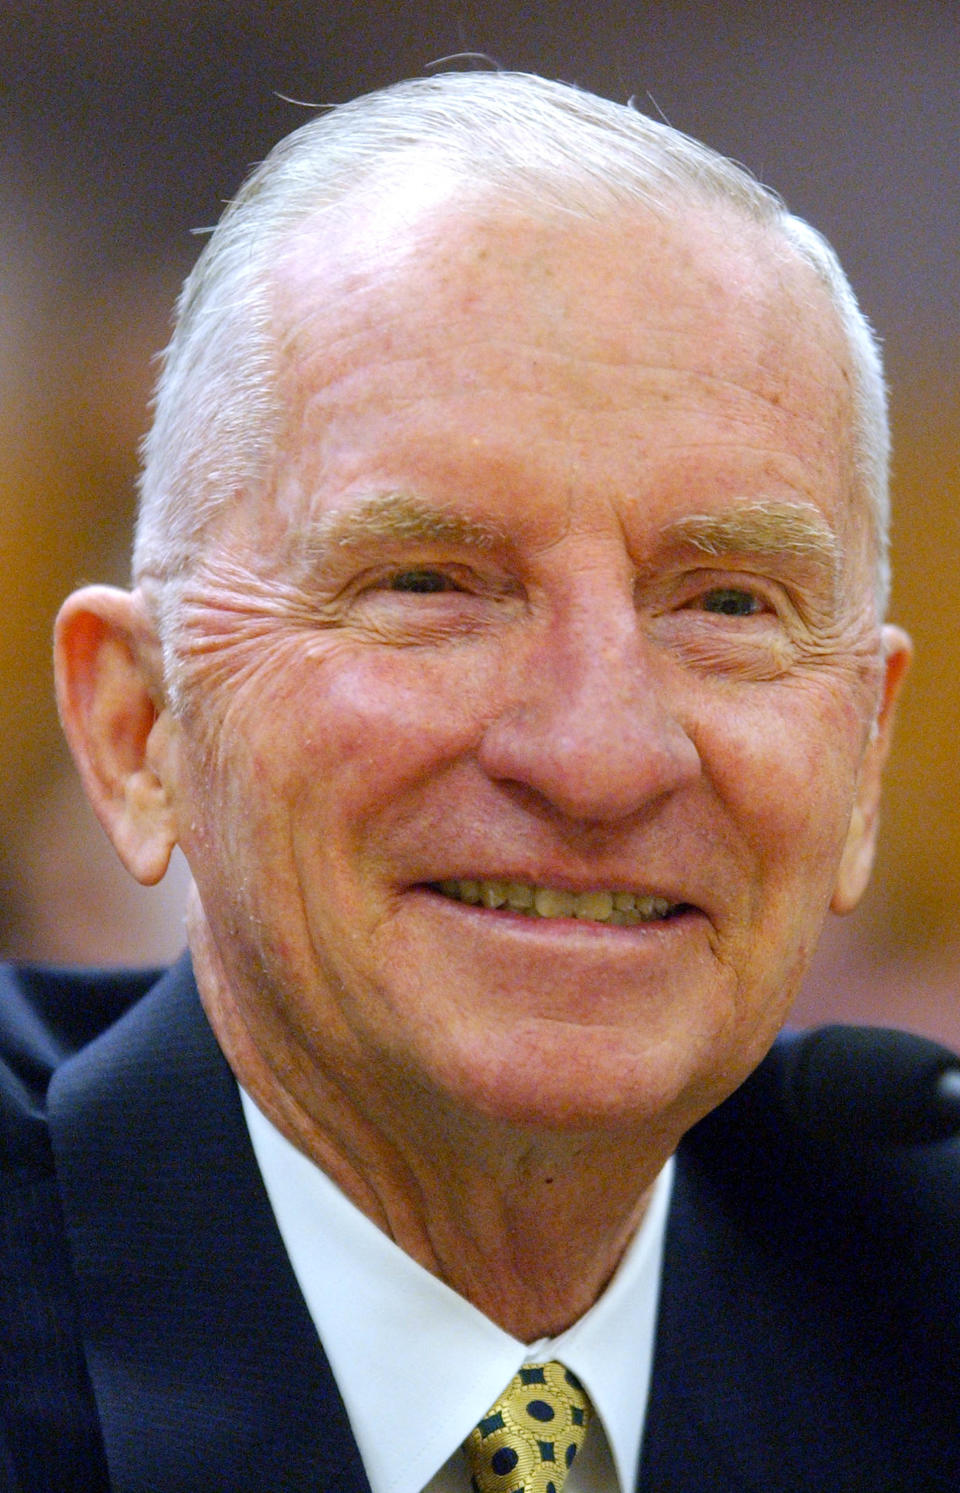 Former presidential candidate Ross Perot died at 89 on July 9, 2019, at his Dallas home.